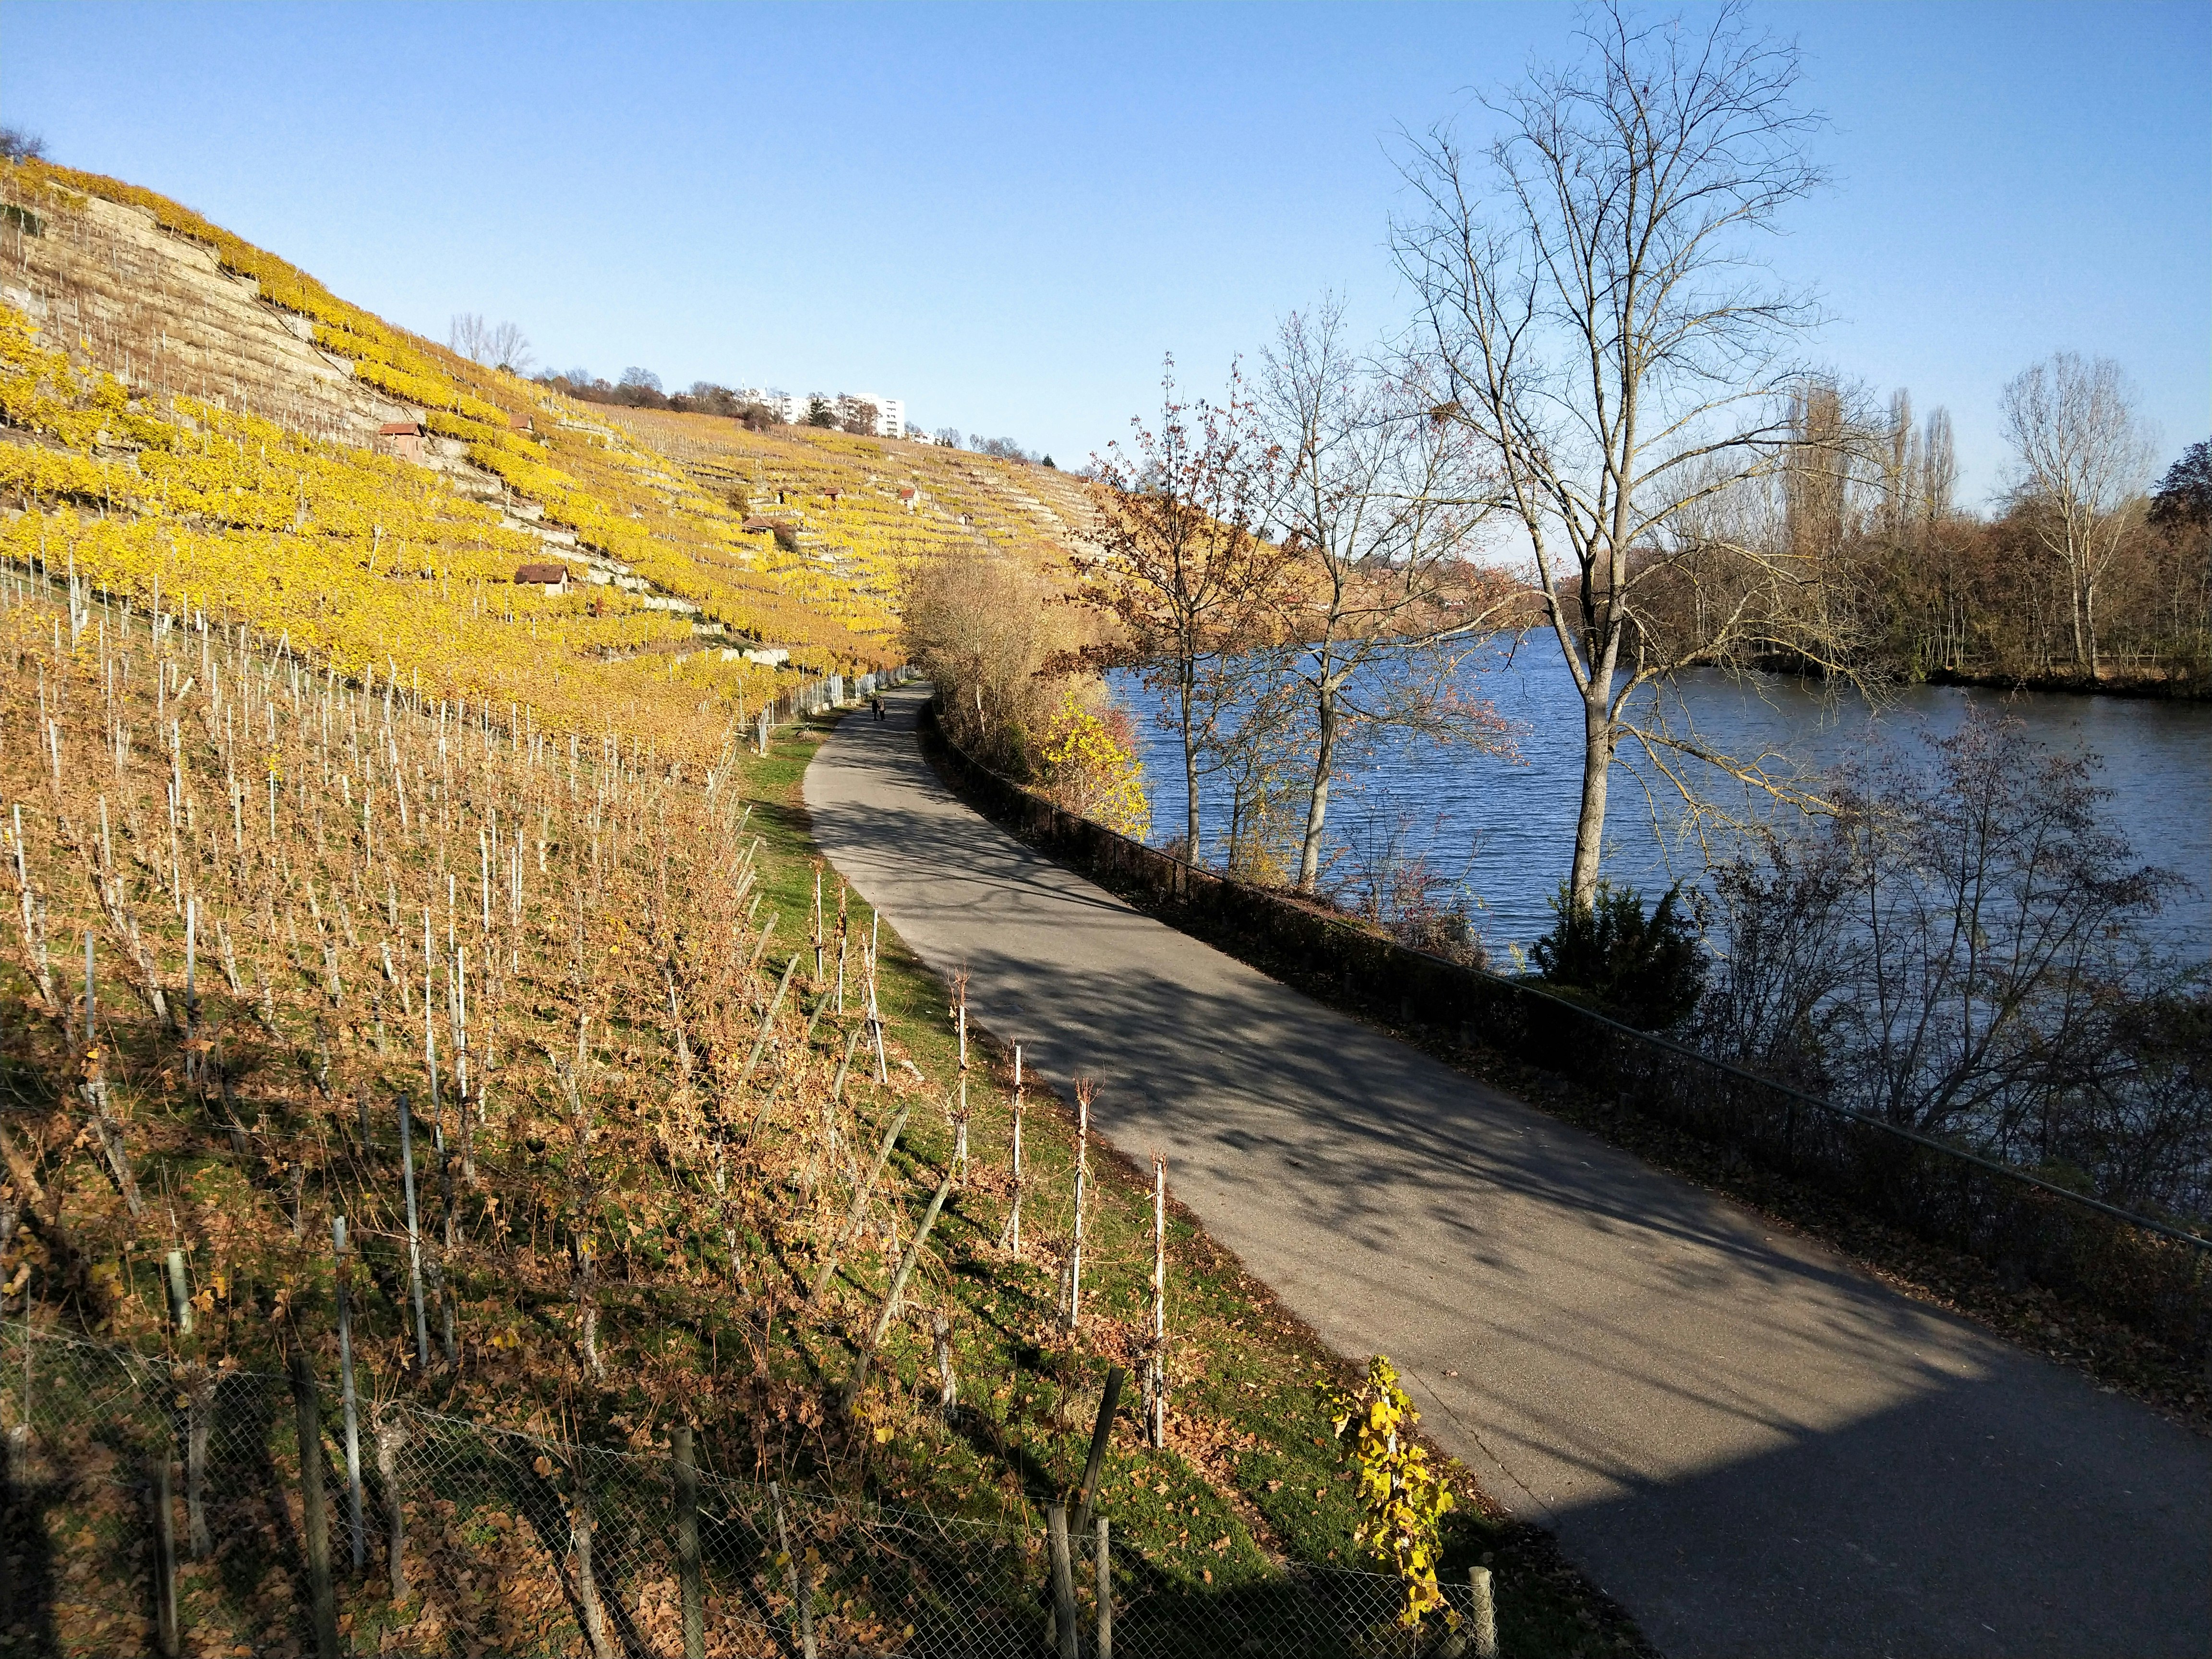 A well-kept path curves along a narrow part of a lake in autumn. To the left is a slope that has some bare vines, and others whose leaves have turned yellow.